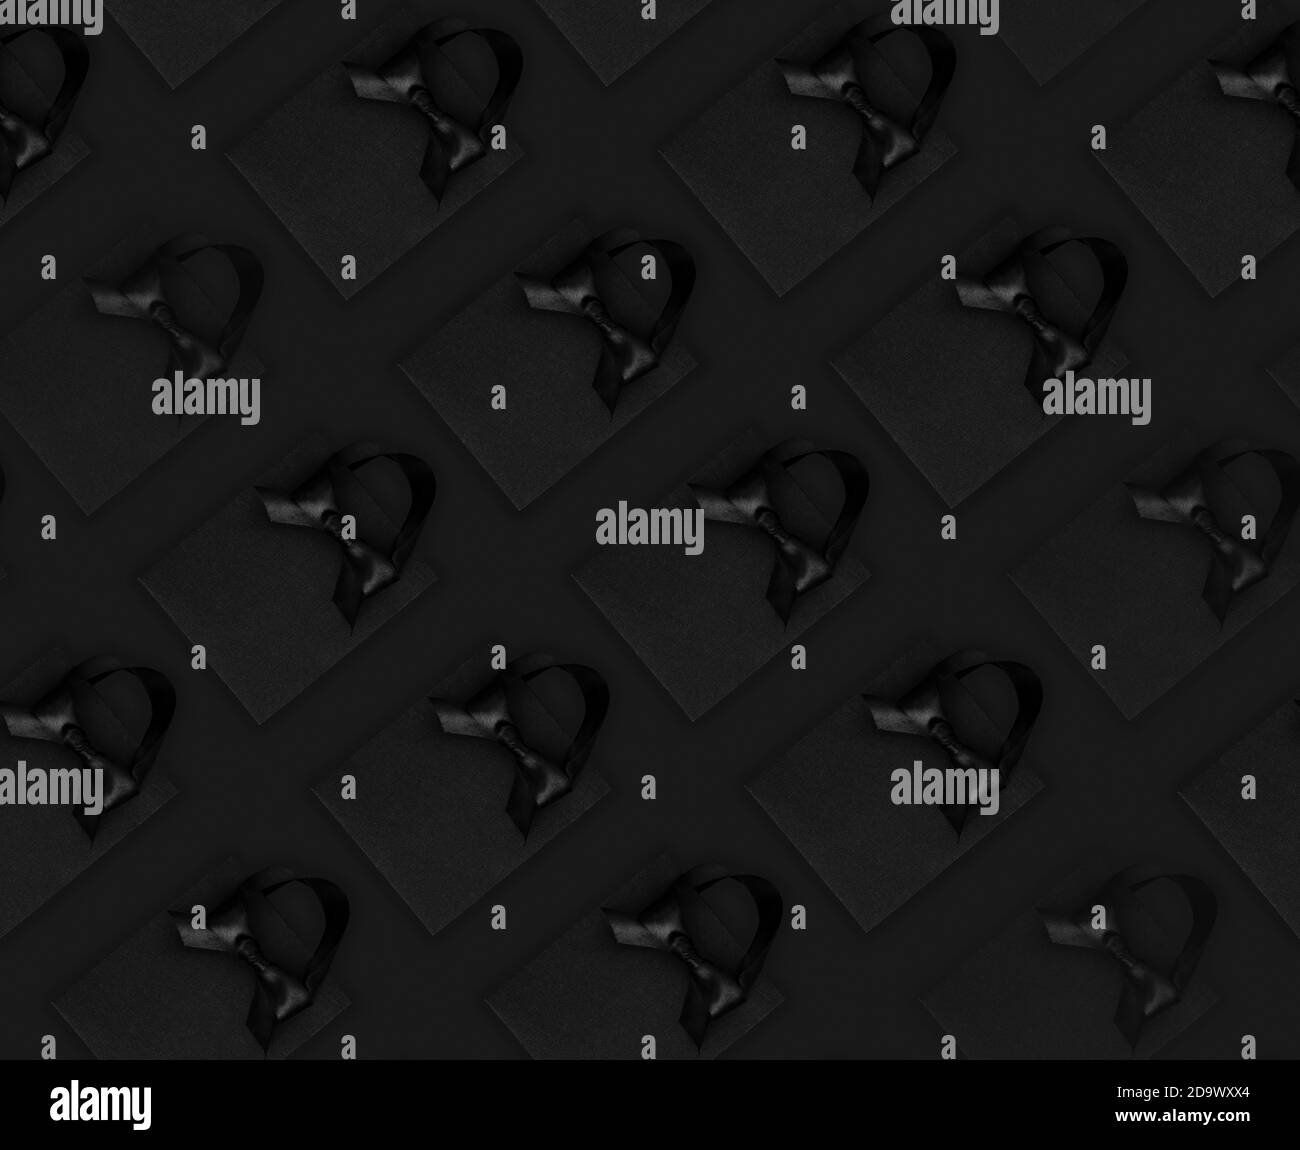 Seamless background Black shopping bags and gift boxes on black, Black Friday sale shopping concept Stock Photo